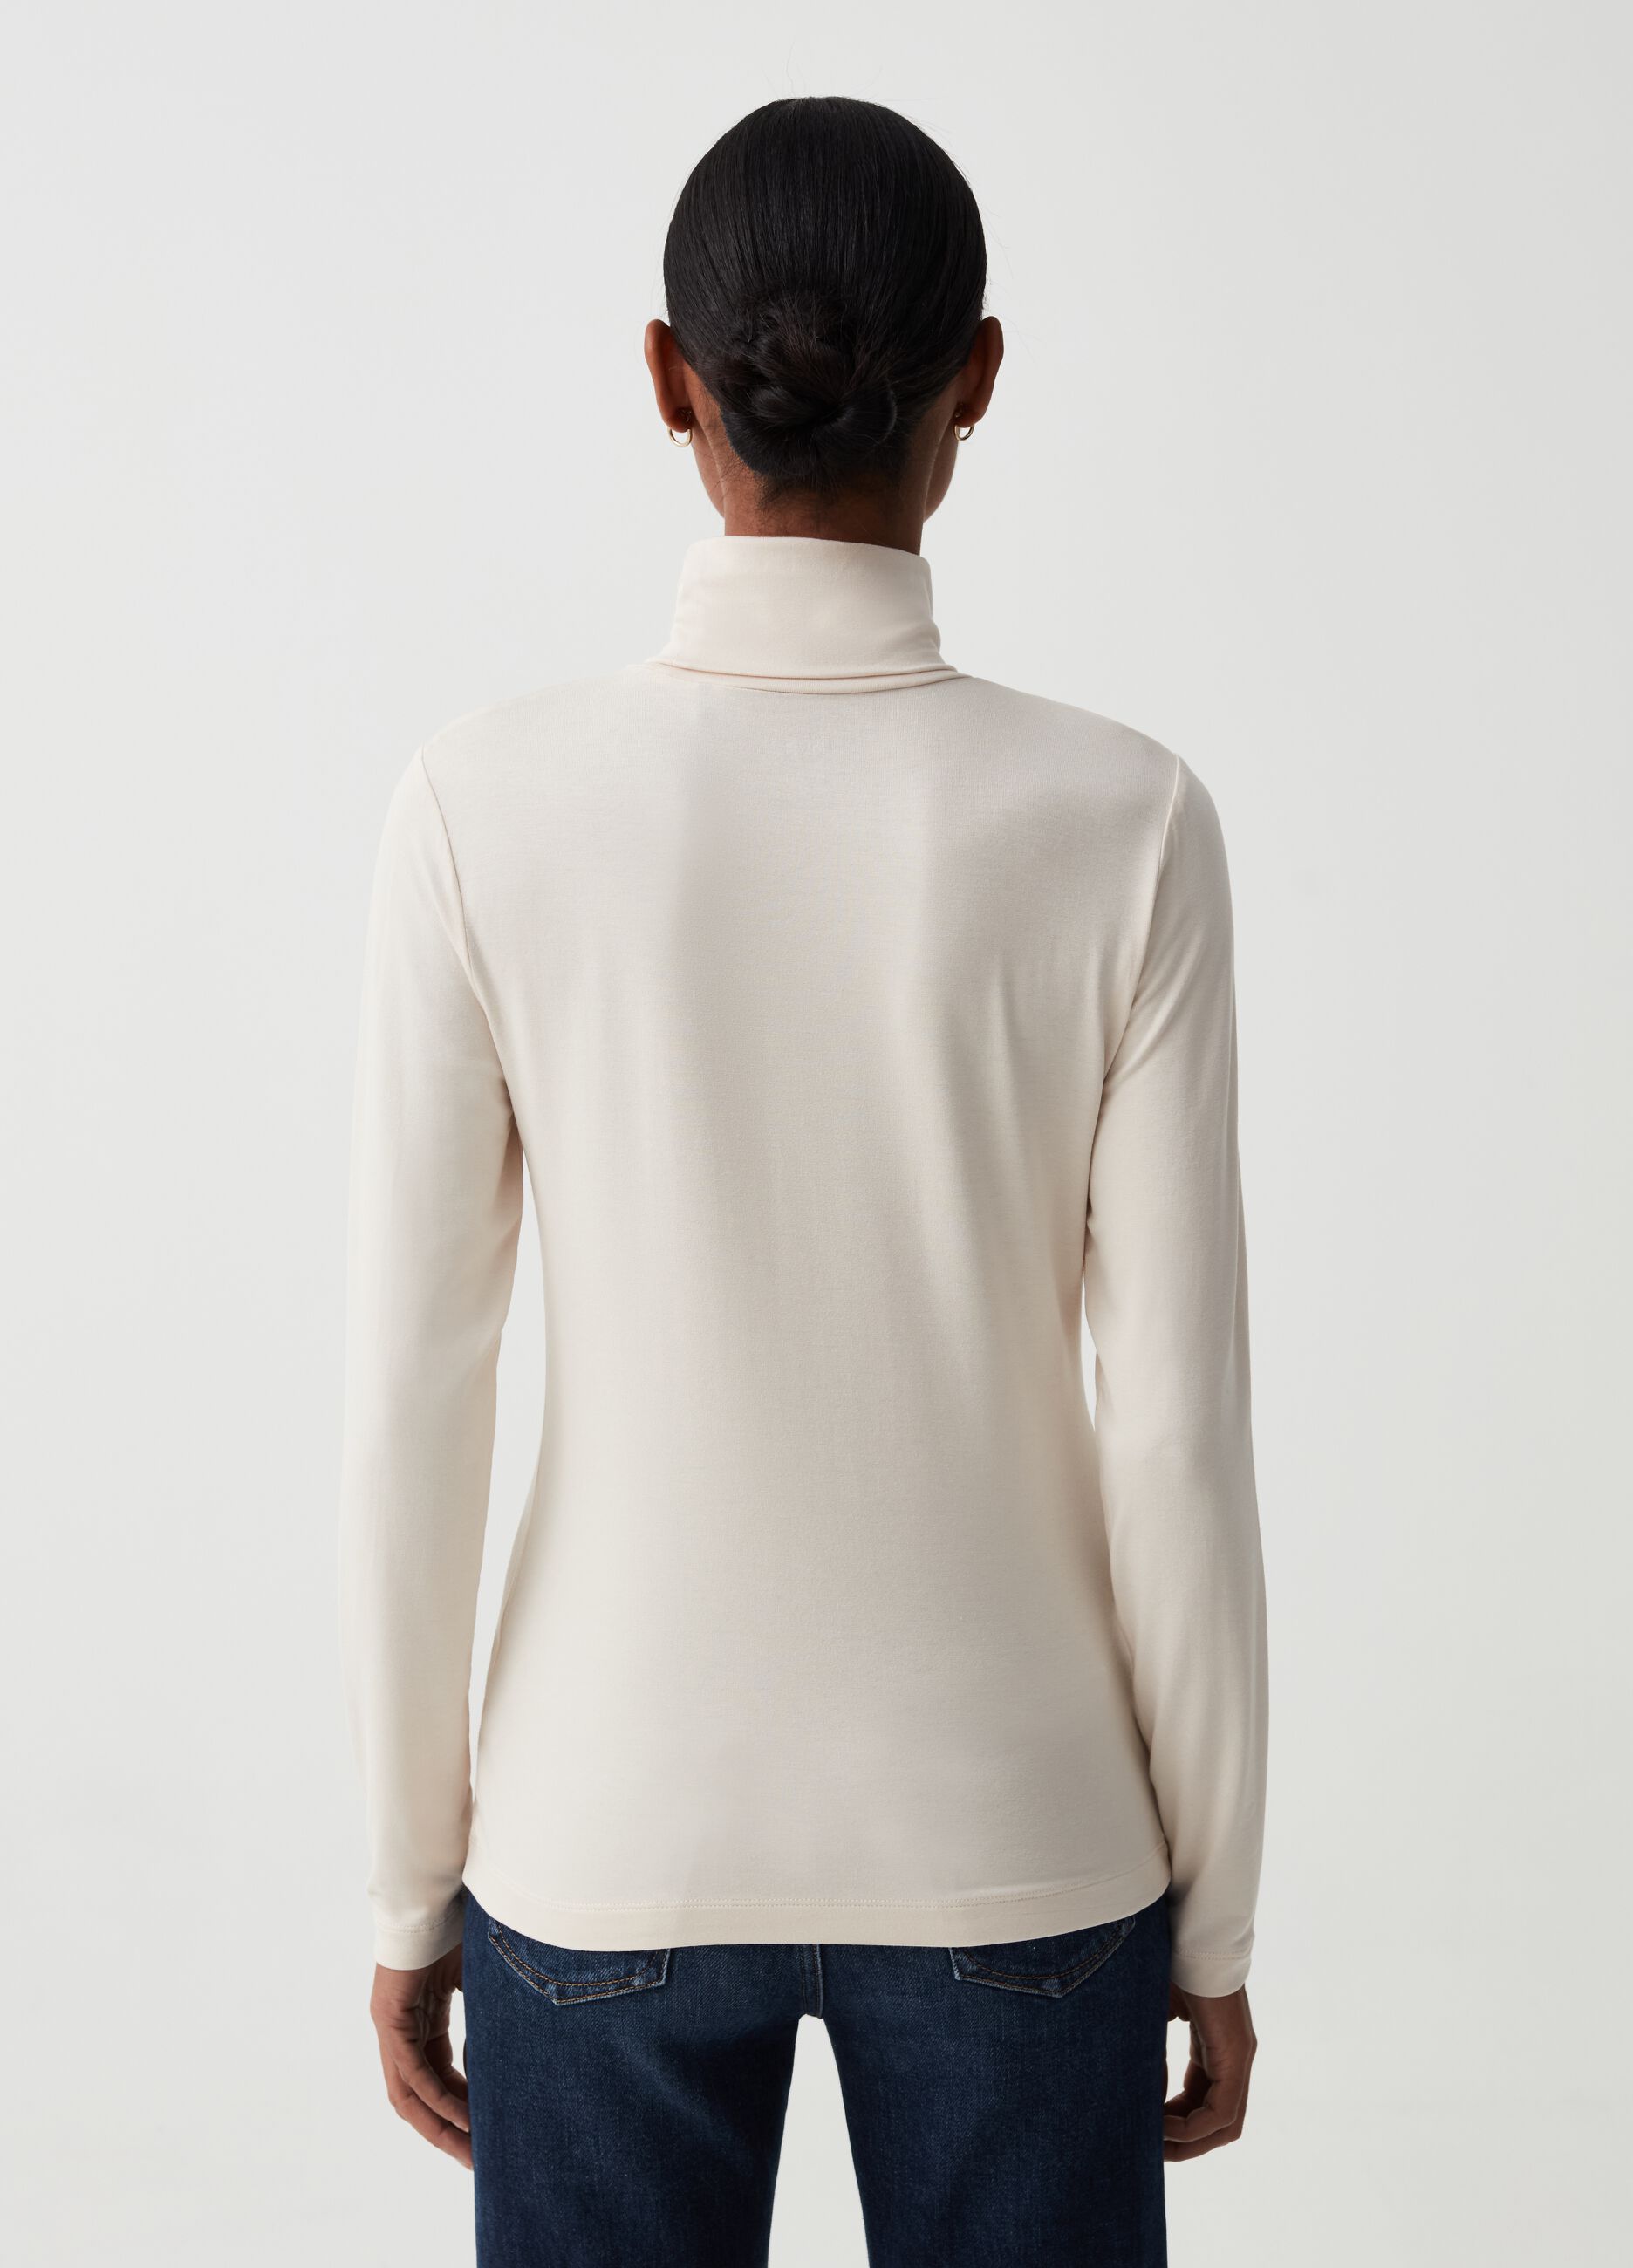 T-shirt with long sleeves and high neck